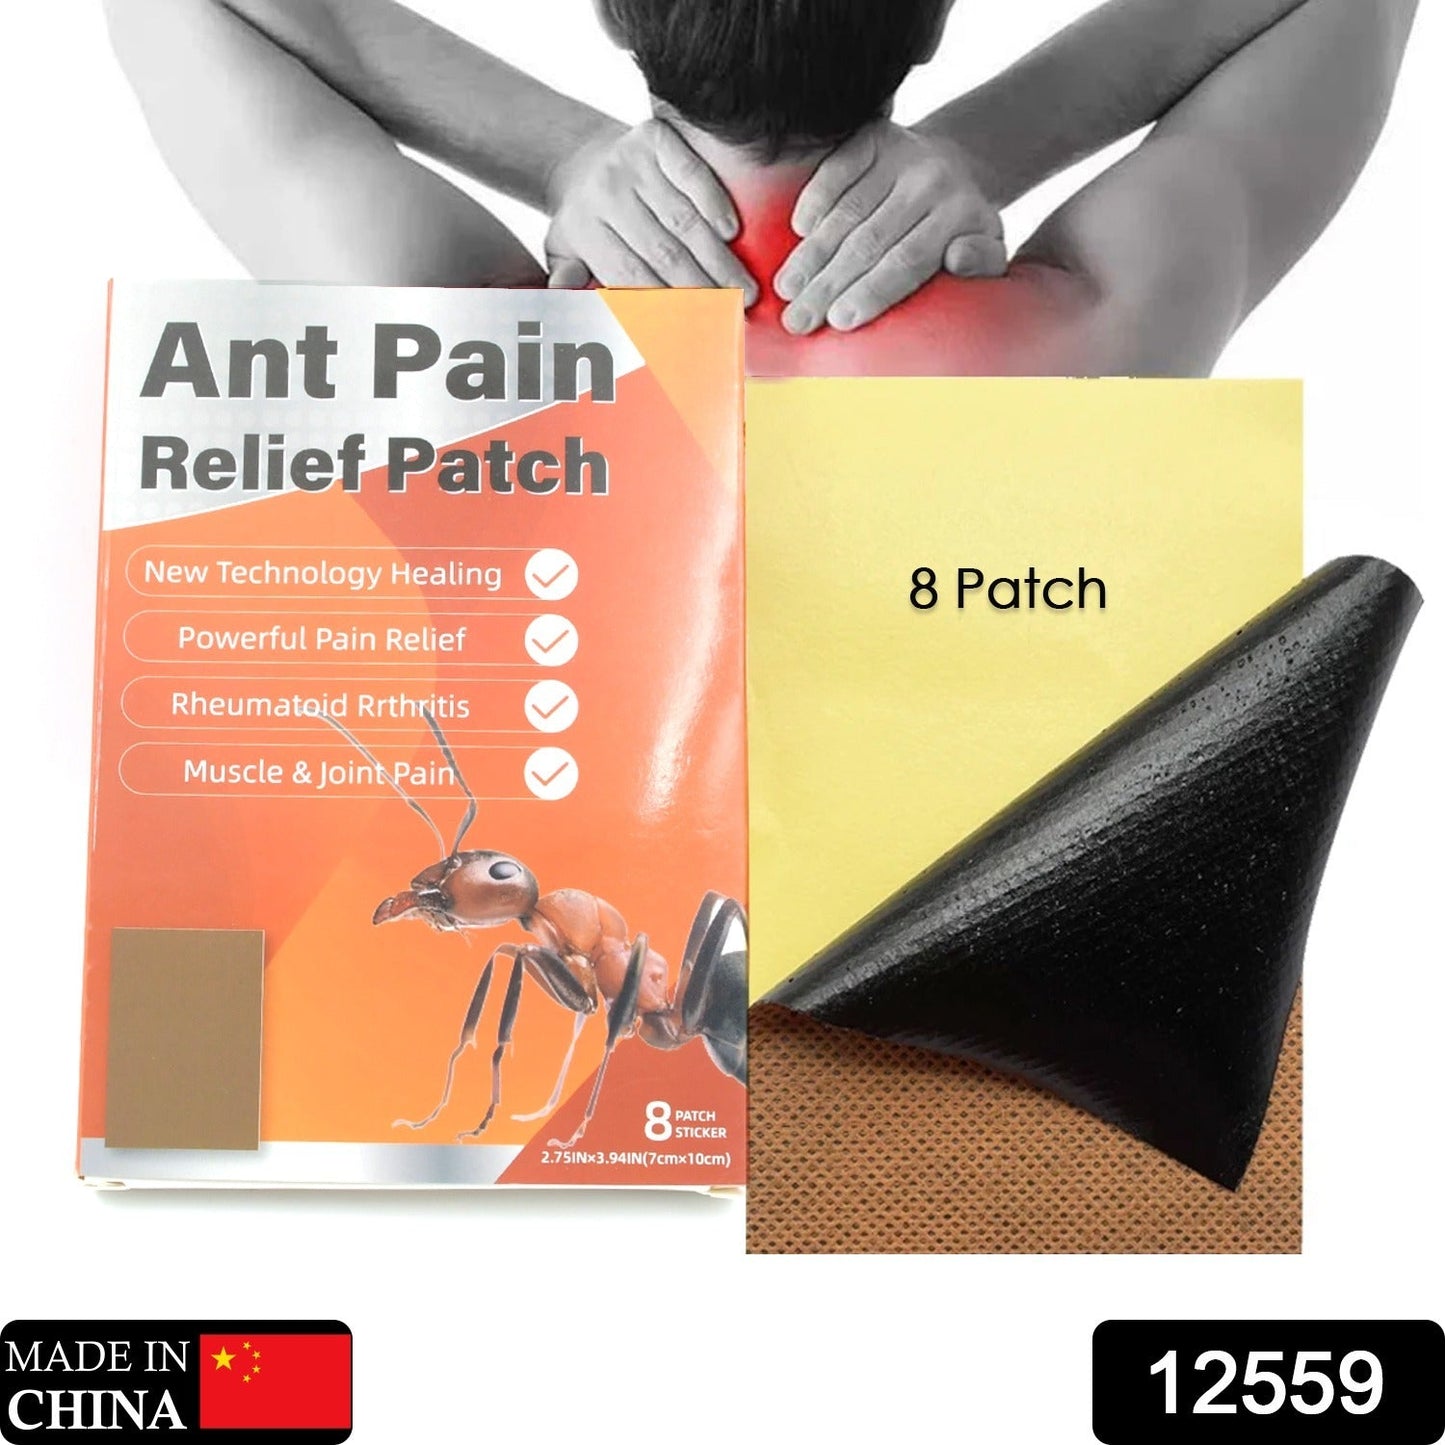 12559 Ant Pain Relief Patch - Pack of 8 Patches | Instant Relief from Muscular Pain & Joint Pain| Natural Pain Relief Patches | Powerful Pain Relief, No Side Effects